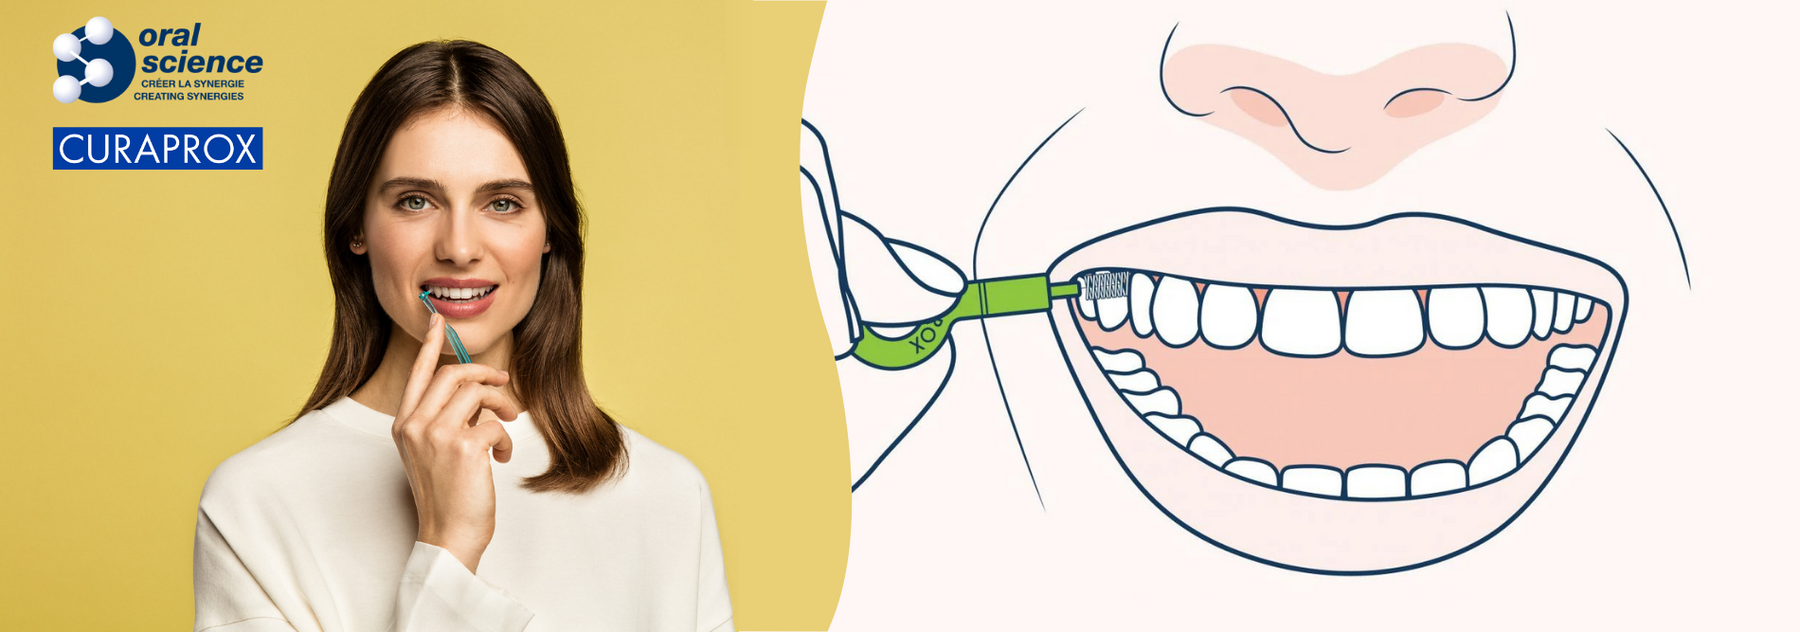 Everyone is talking about interdental brushing, but why do we need it?